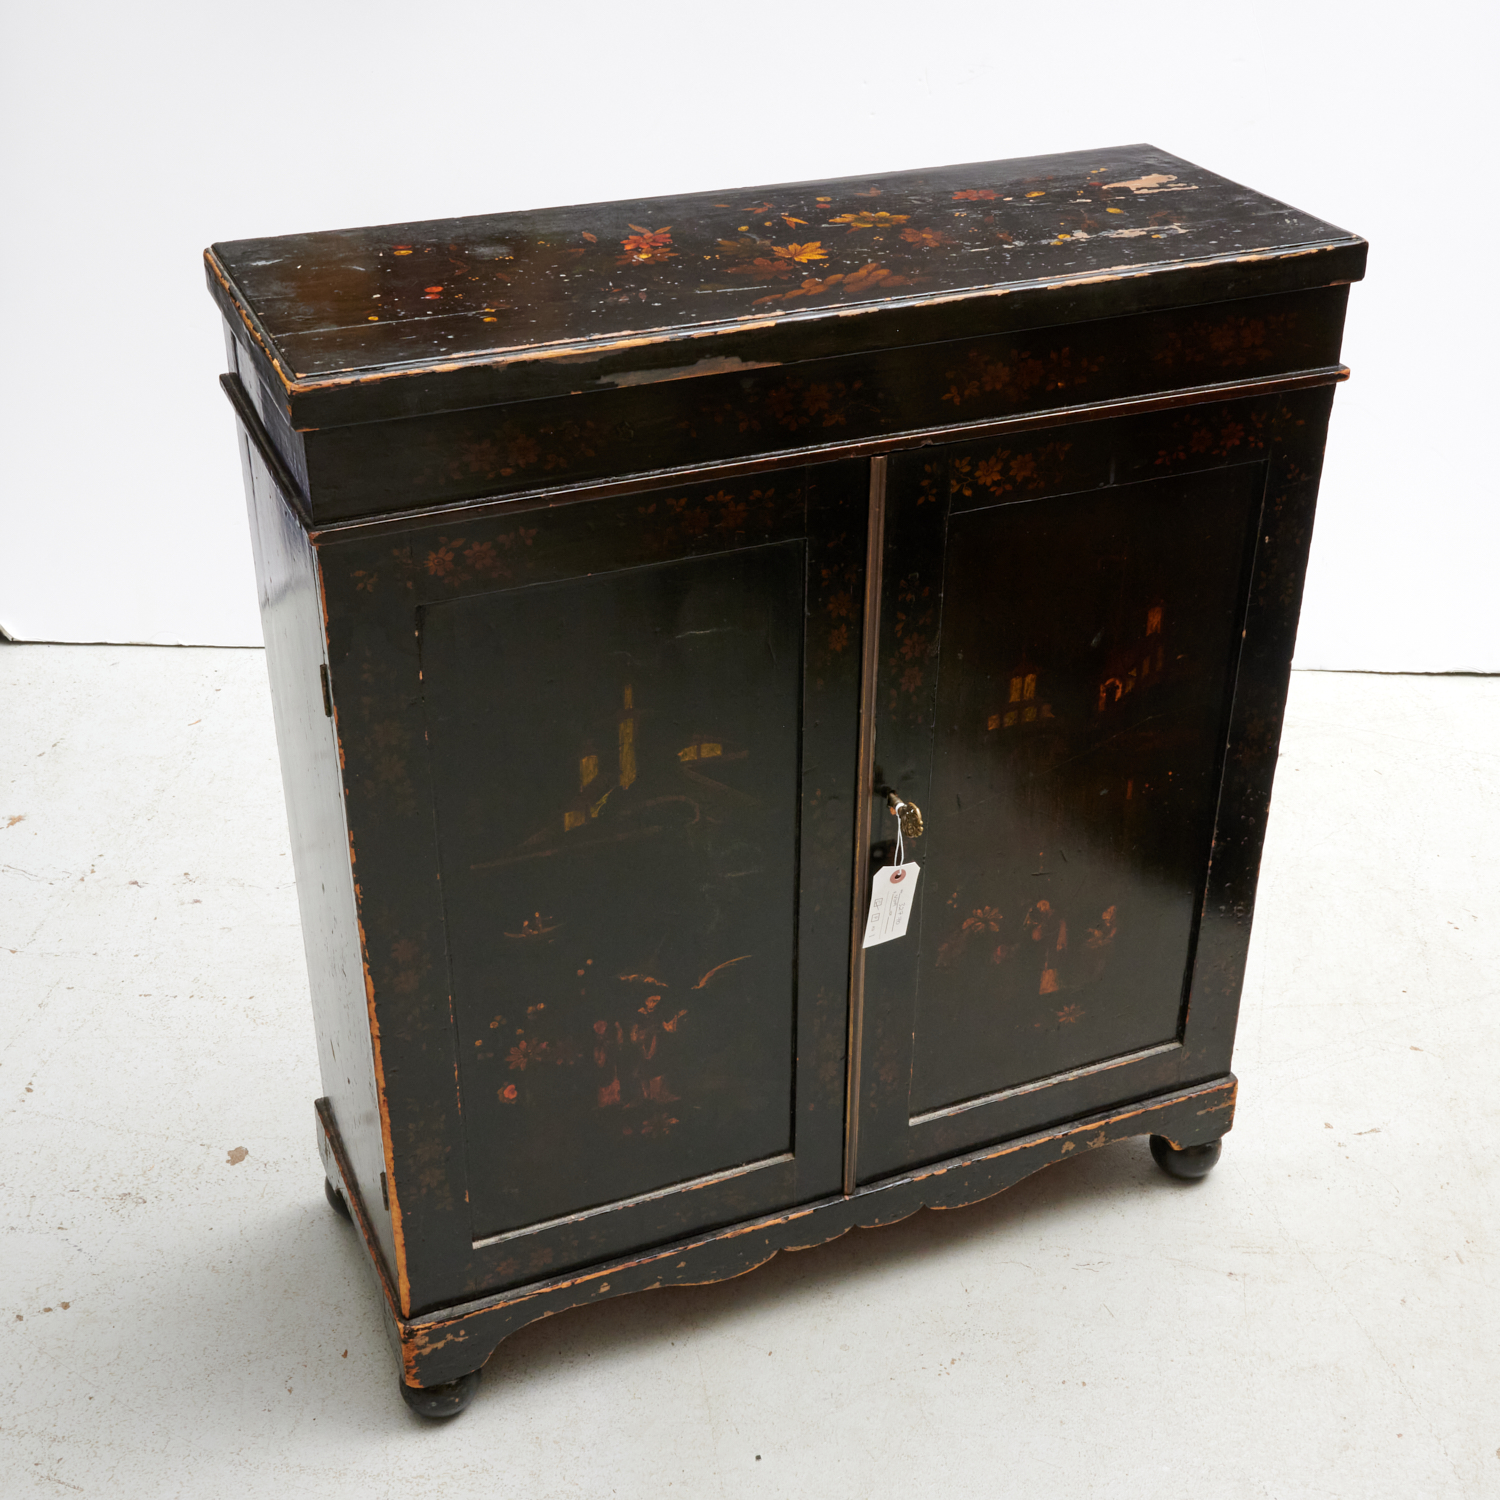 VINTAGE CHINOISERIE LACQUERED CABINET 2ce4d7